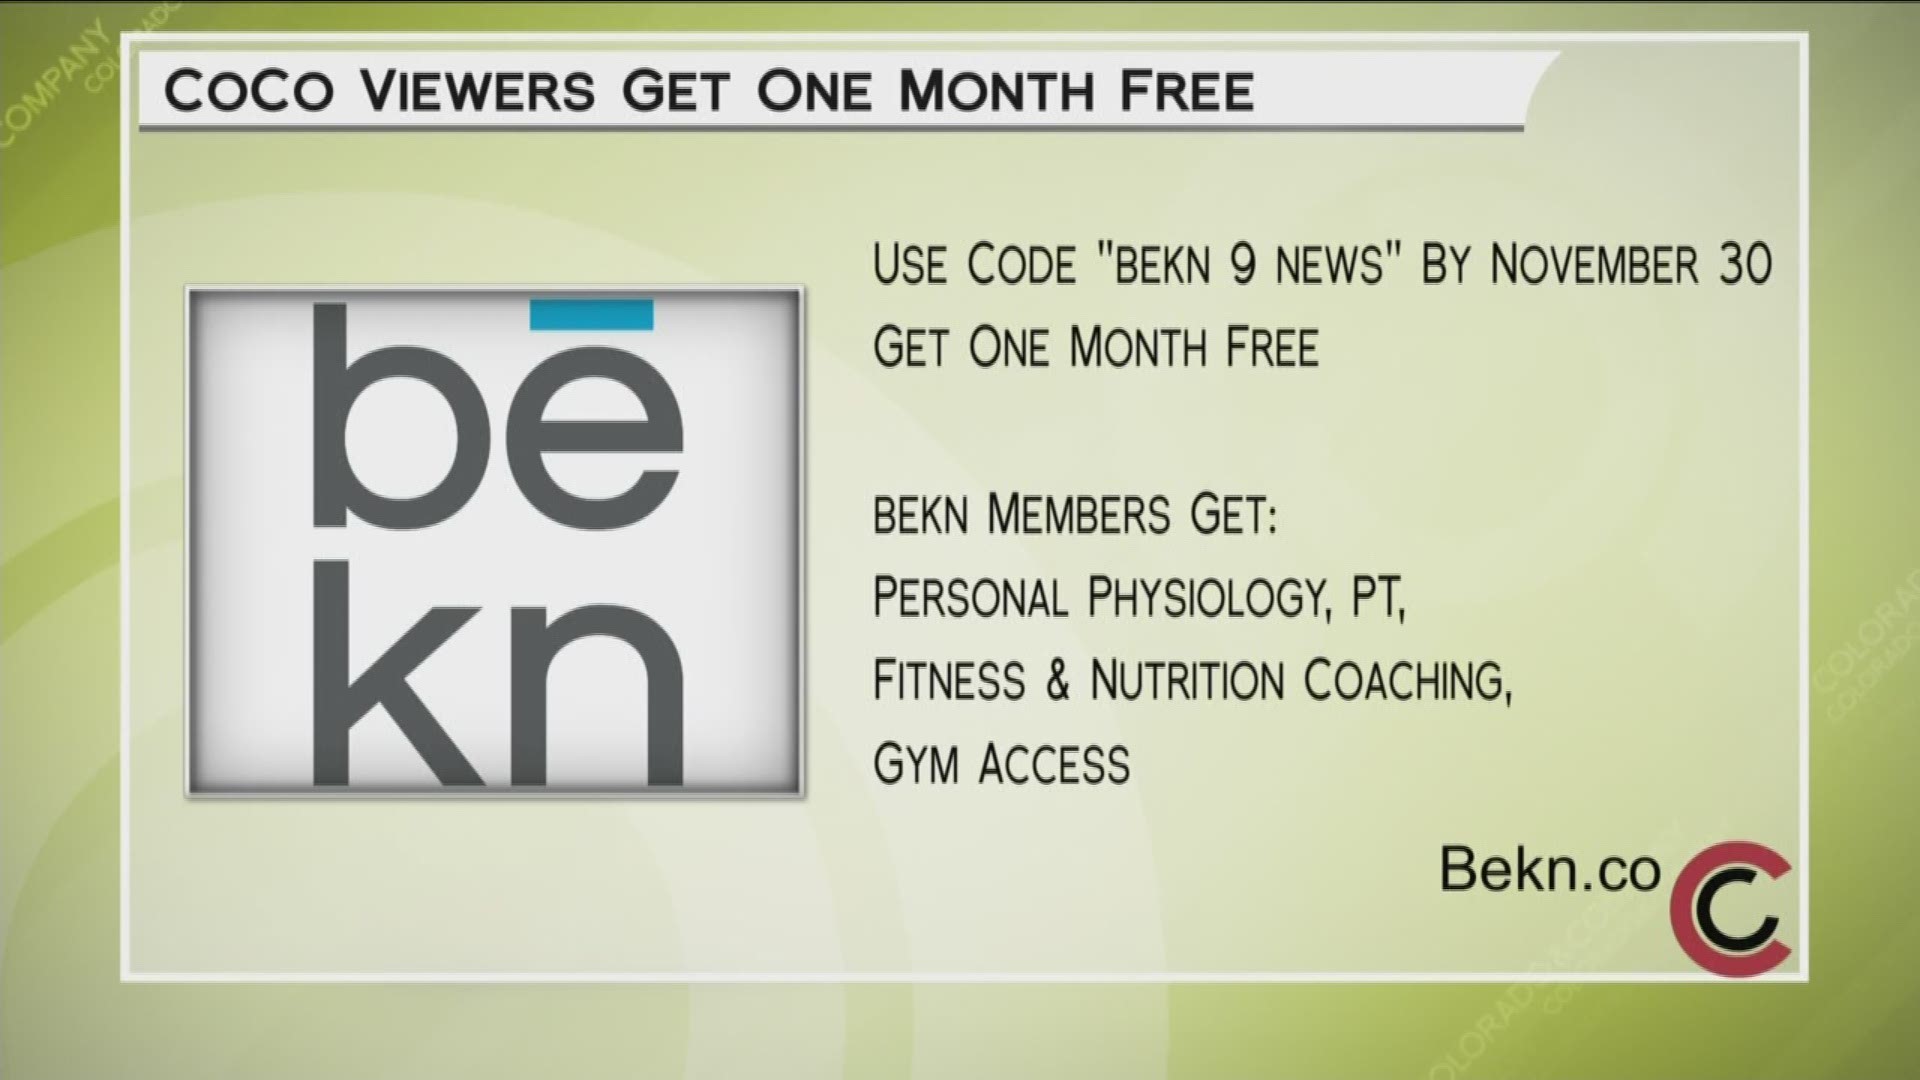 Hit your fitness goals with bēkn. Memberships are just $49 a month. Learn more at www.bekn.co.